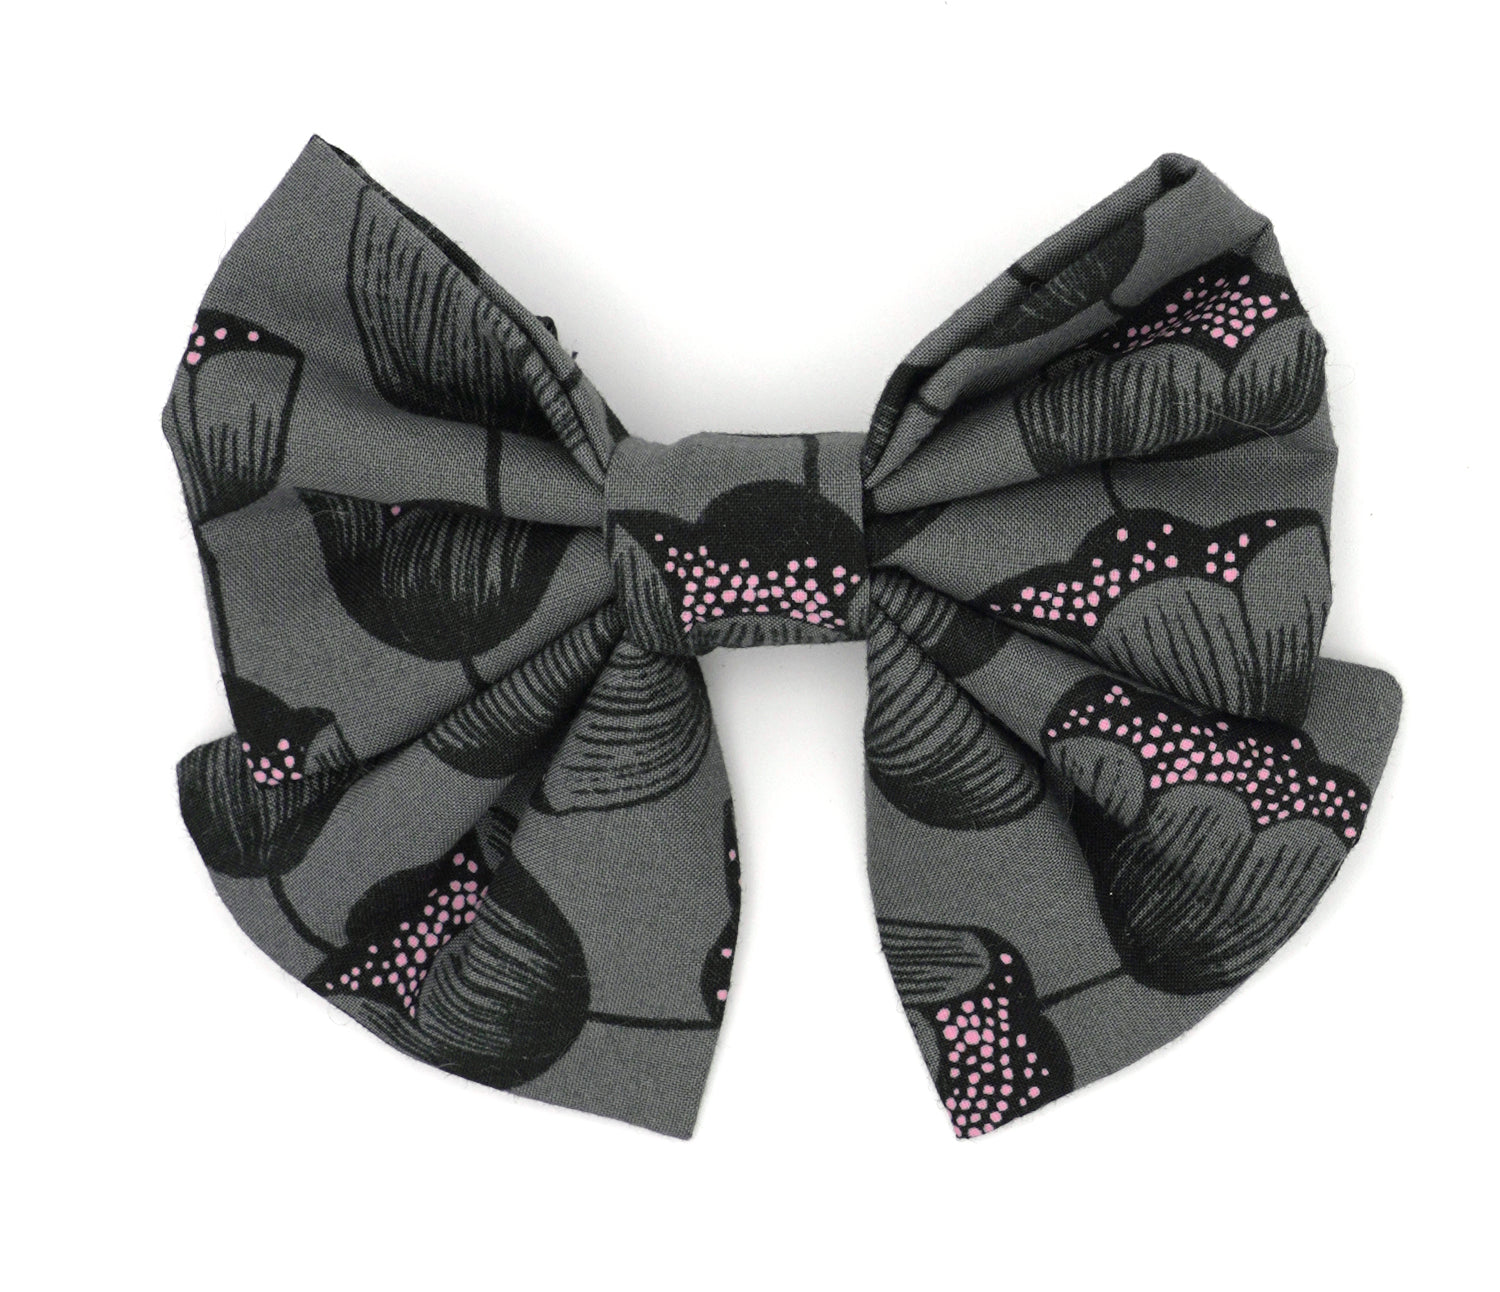 Handmade cotton bow tie with tails for dogs (or other pets). Elastic straps on back with snaps make it easy to add to collar, harness, or leash. Charcoal grey background with black and pink flowers.